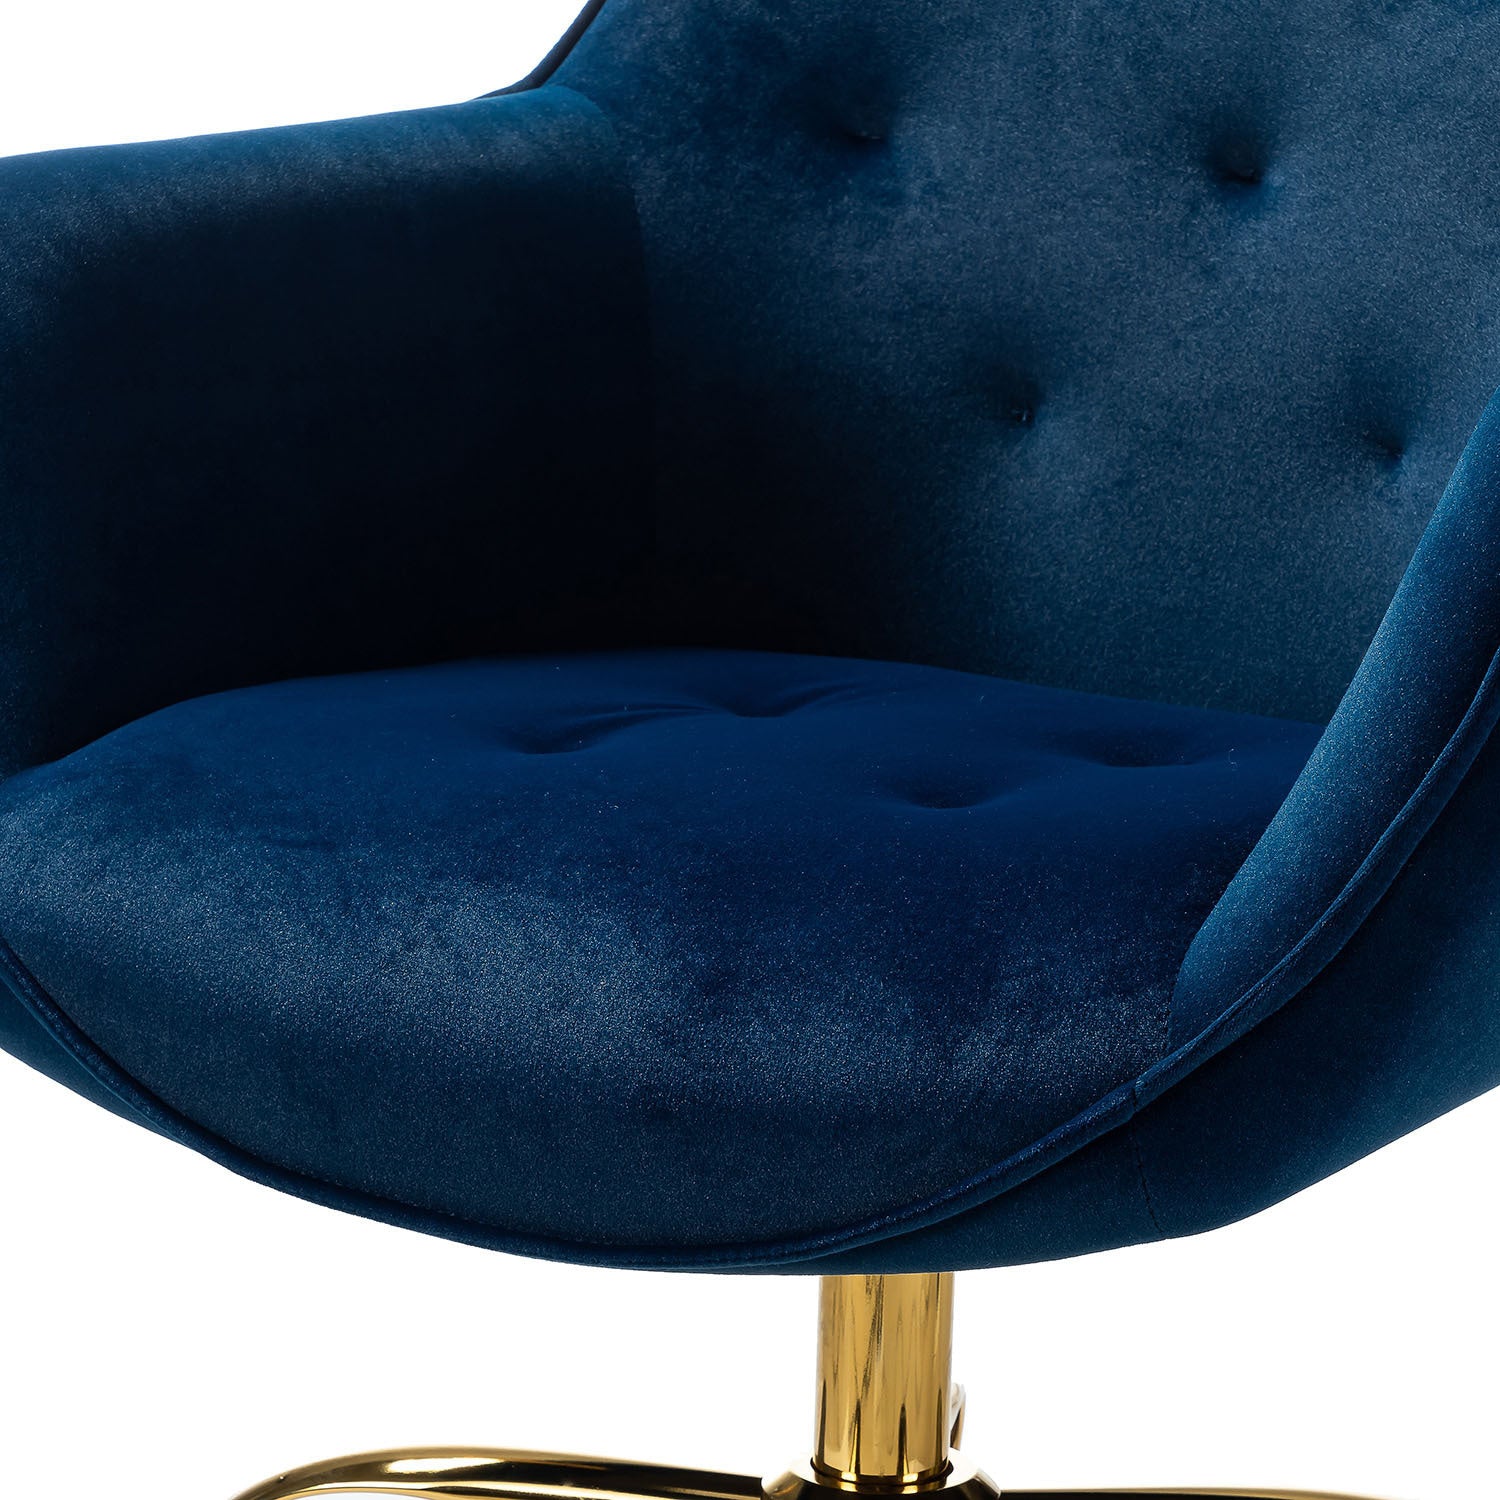 Task Chair With Tufted Back and Golden Base - Navy